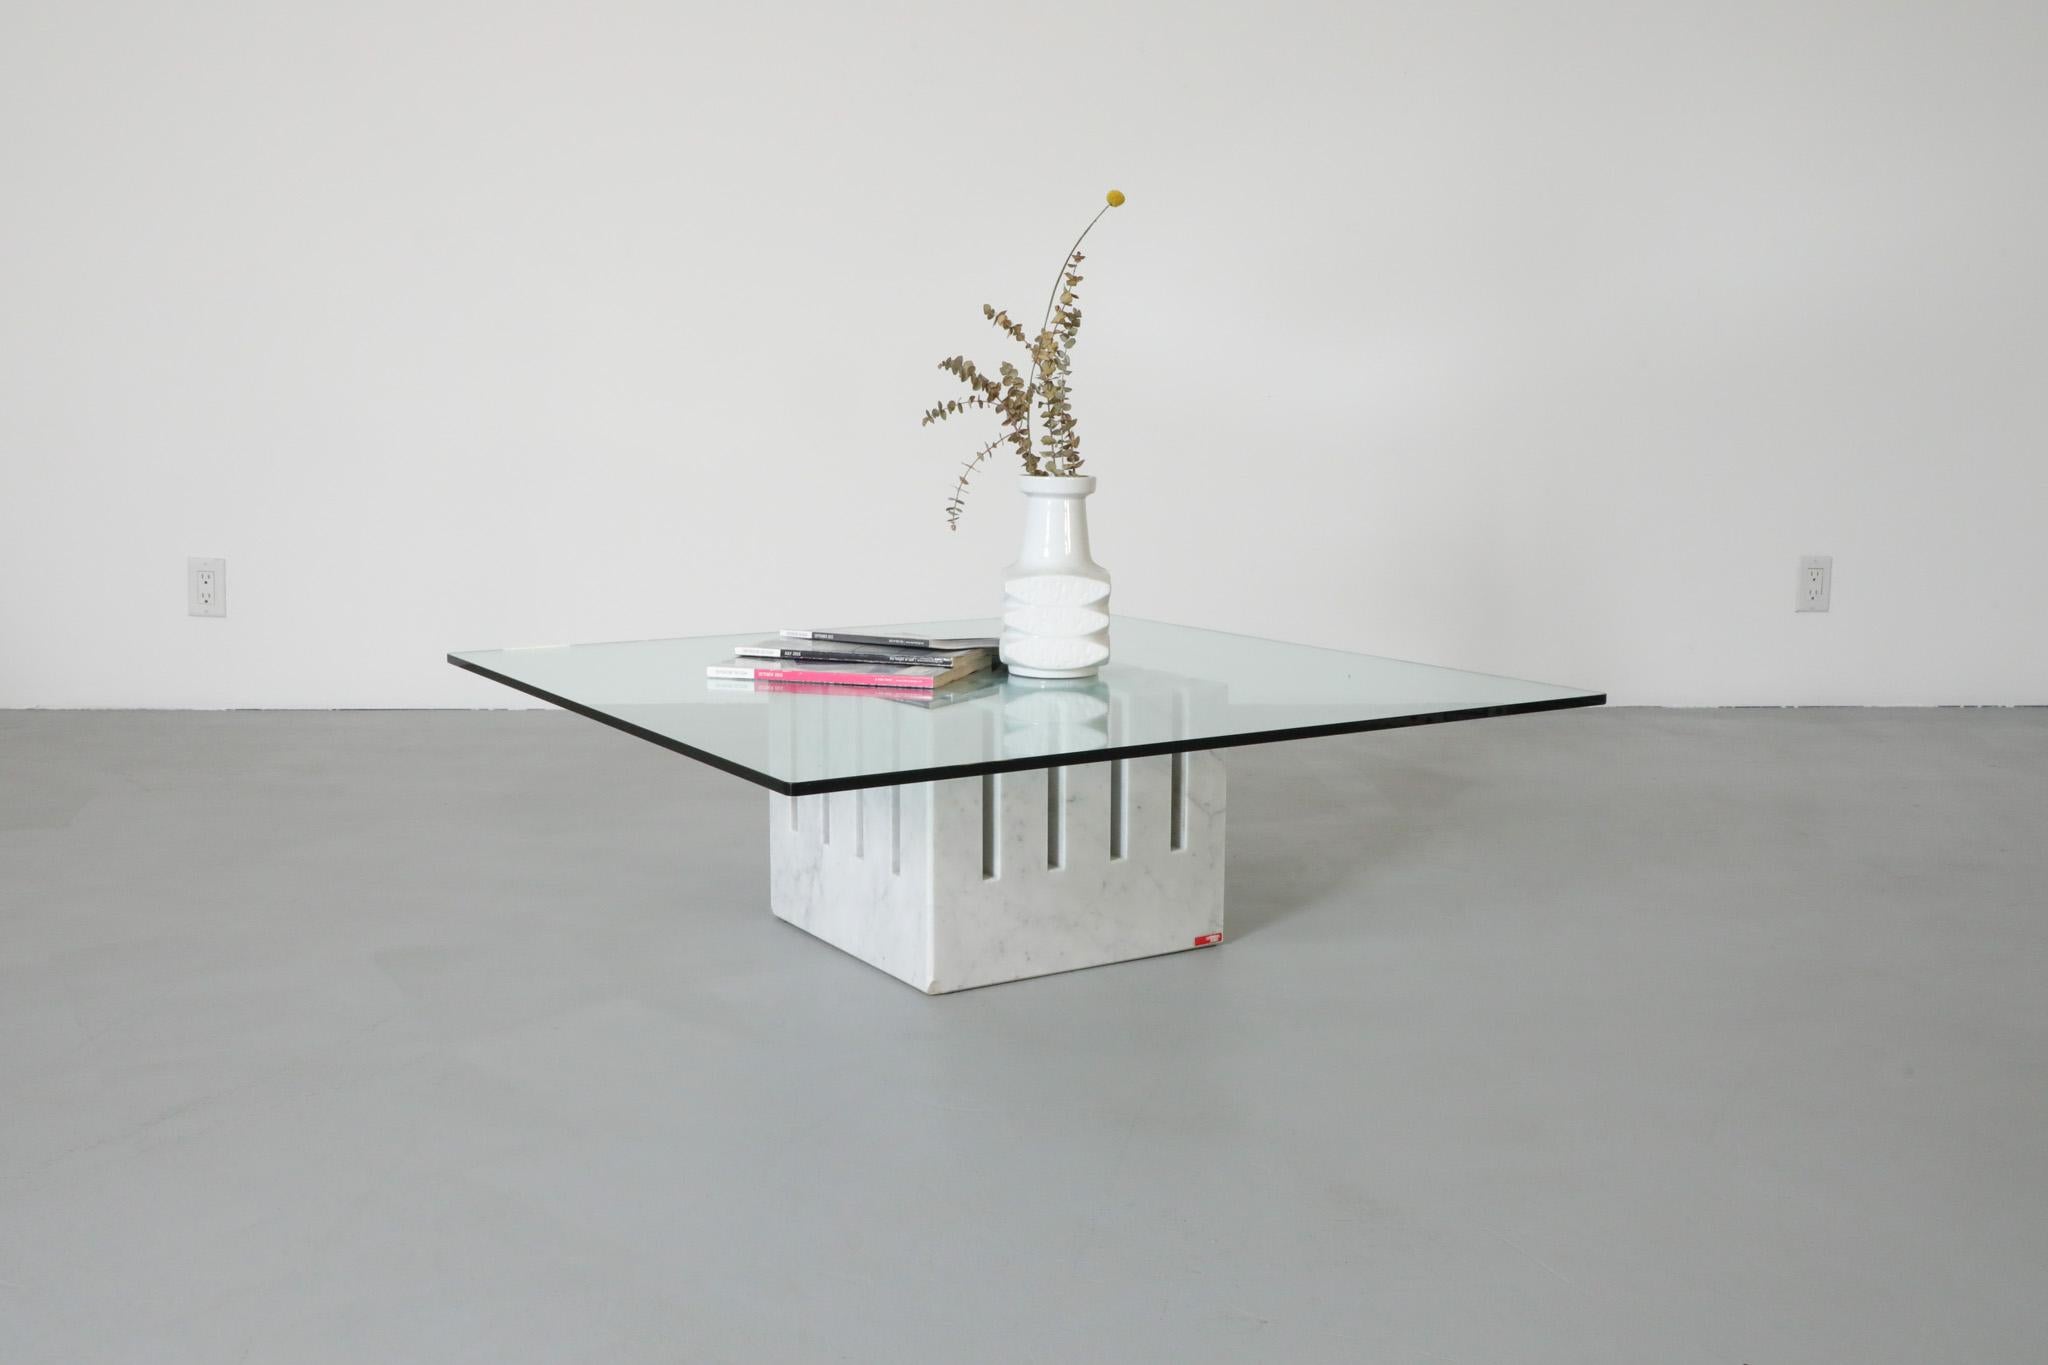 1986 ‘Scacco’ coffee table by Philip Jackson for Cattelan Italia. This square table has an architecturally sculpted marble base with a transparent glass top, giving visibility to the design of the marble base. In original condition with visible